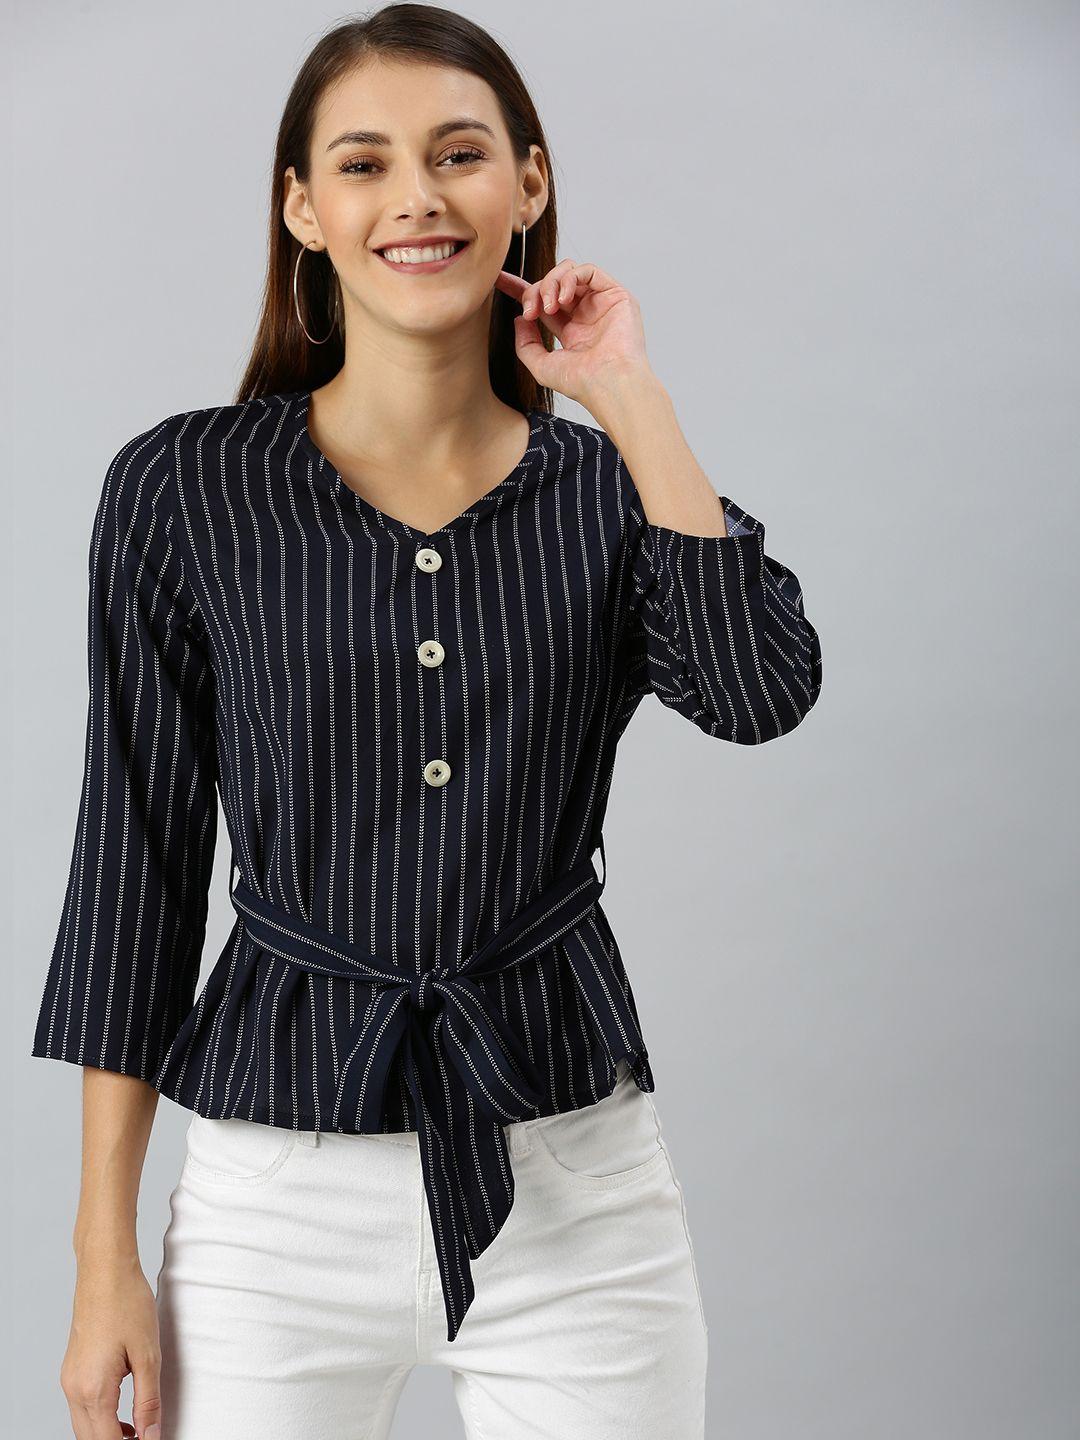 rare women navy blue & white striped top with tie-ups